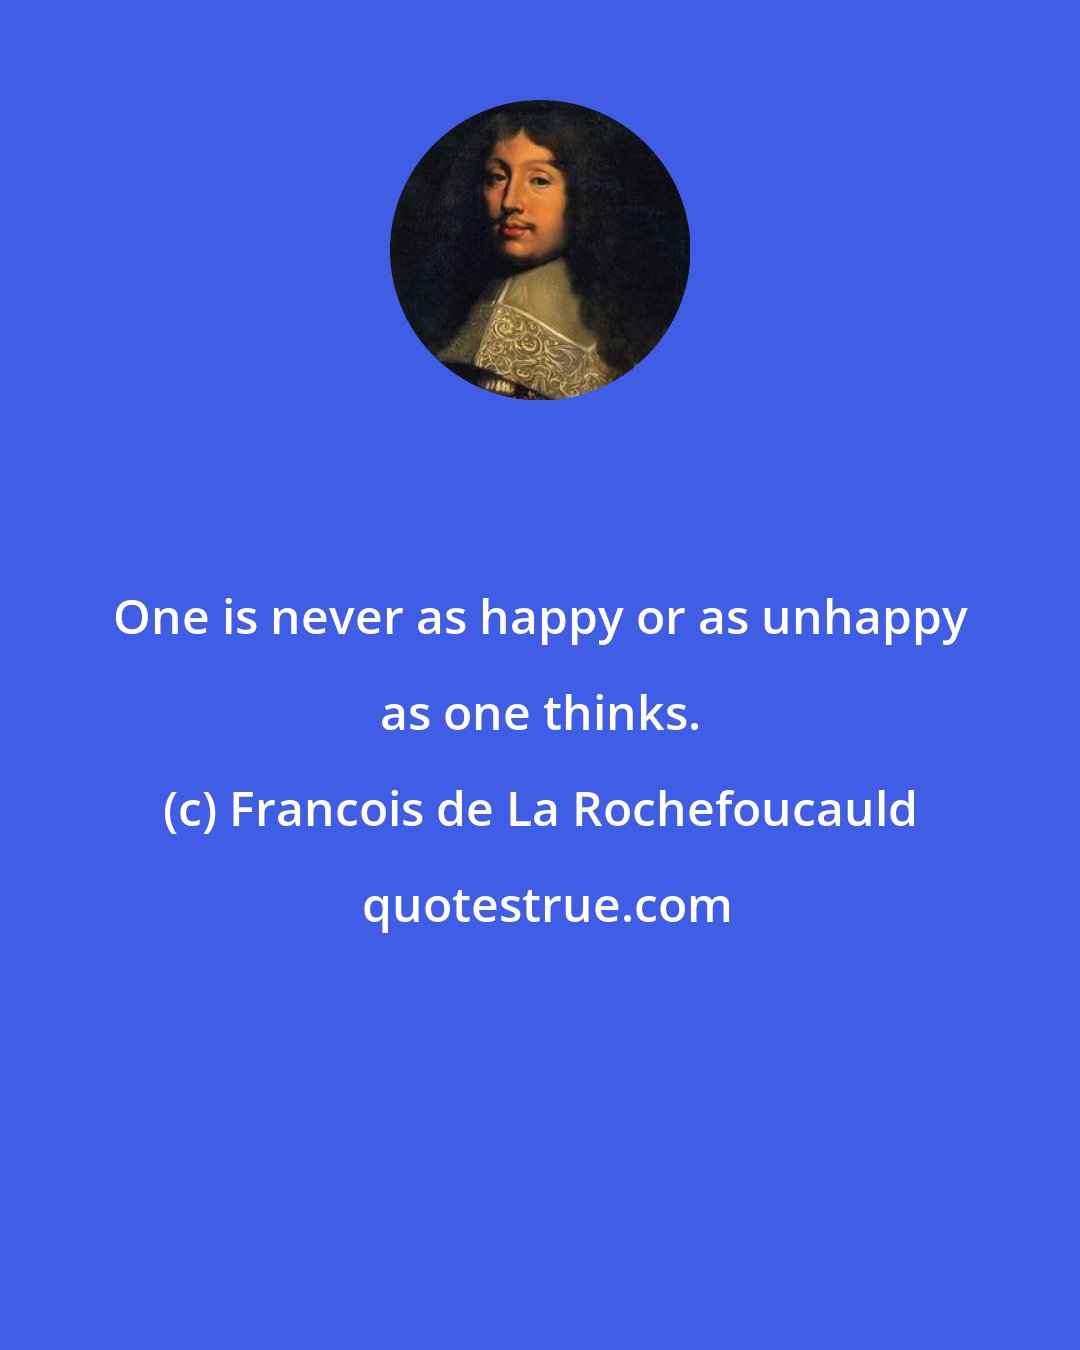 Francois de La Rochefoucauld: One is never as happy or as unhappy as one thinks.